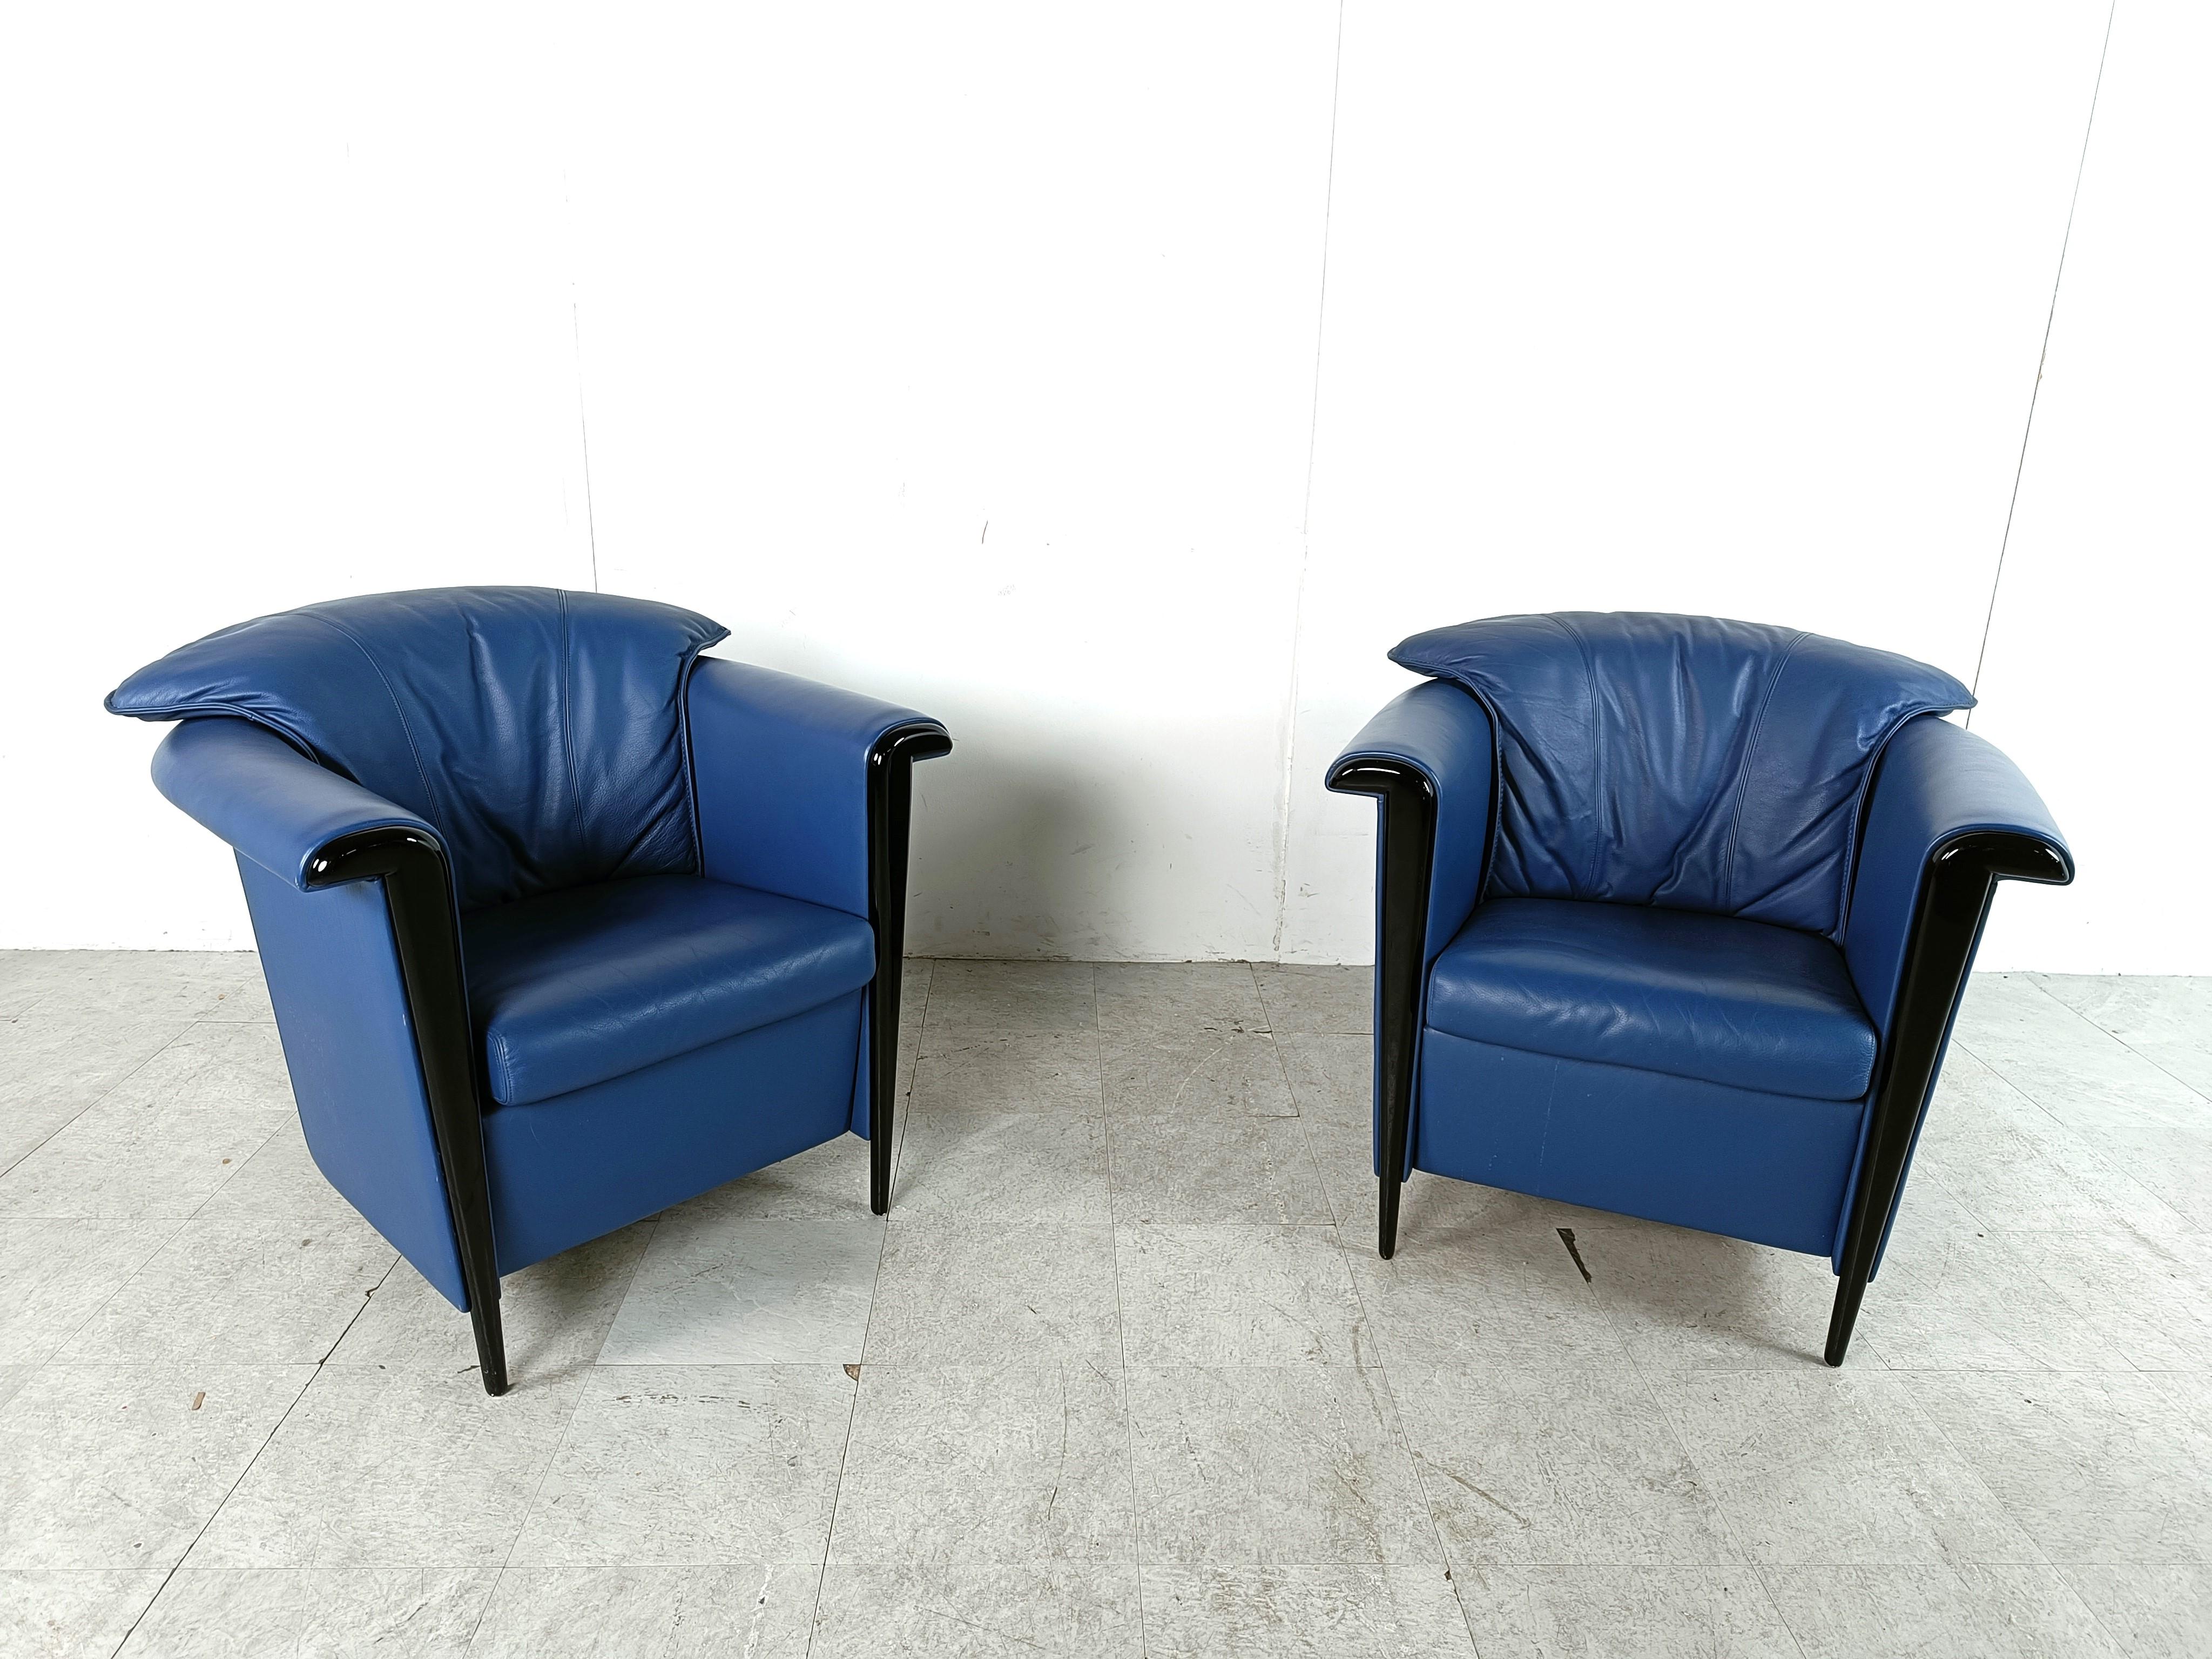 Beautiful vintage blue leather and black gloss wood armchairs by Durlet.

1990s - Belgium

Timeless and very elegant design.

Very good condition

Dimensions
Height: 80cm/31.49